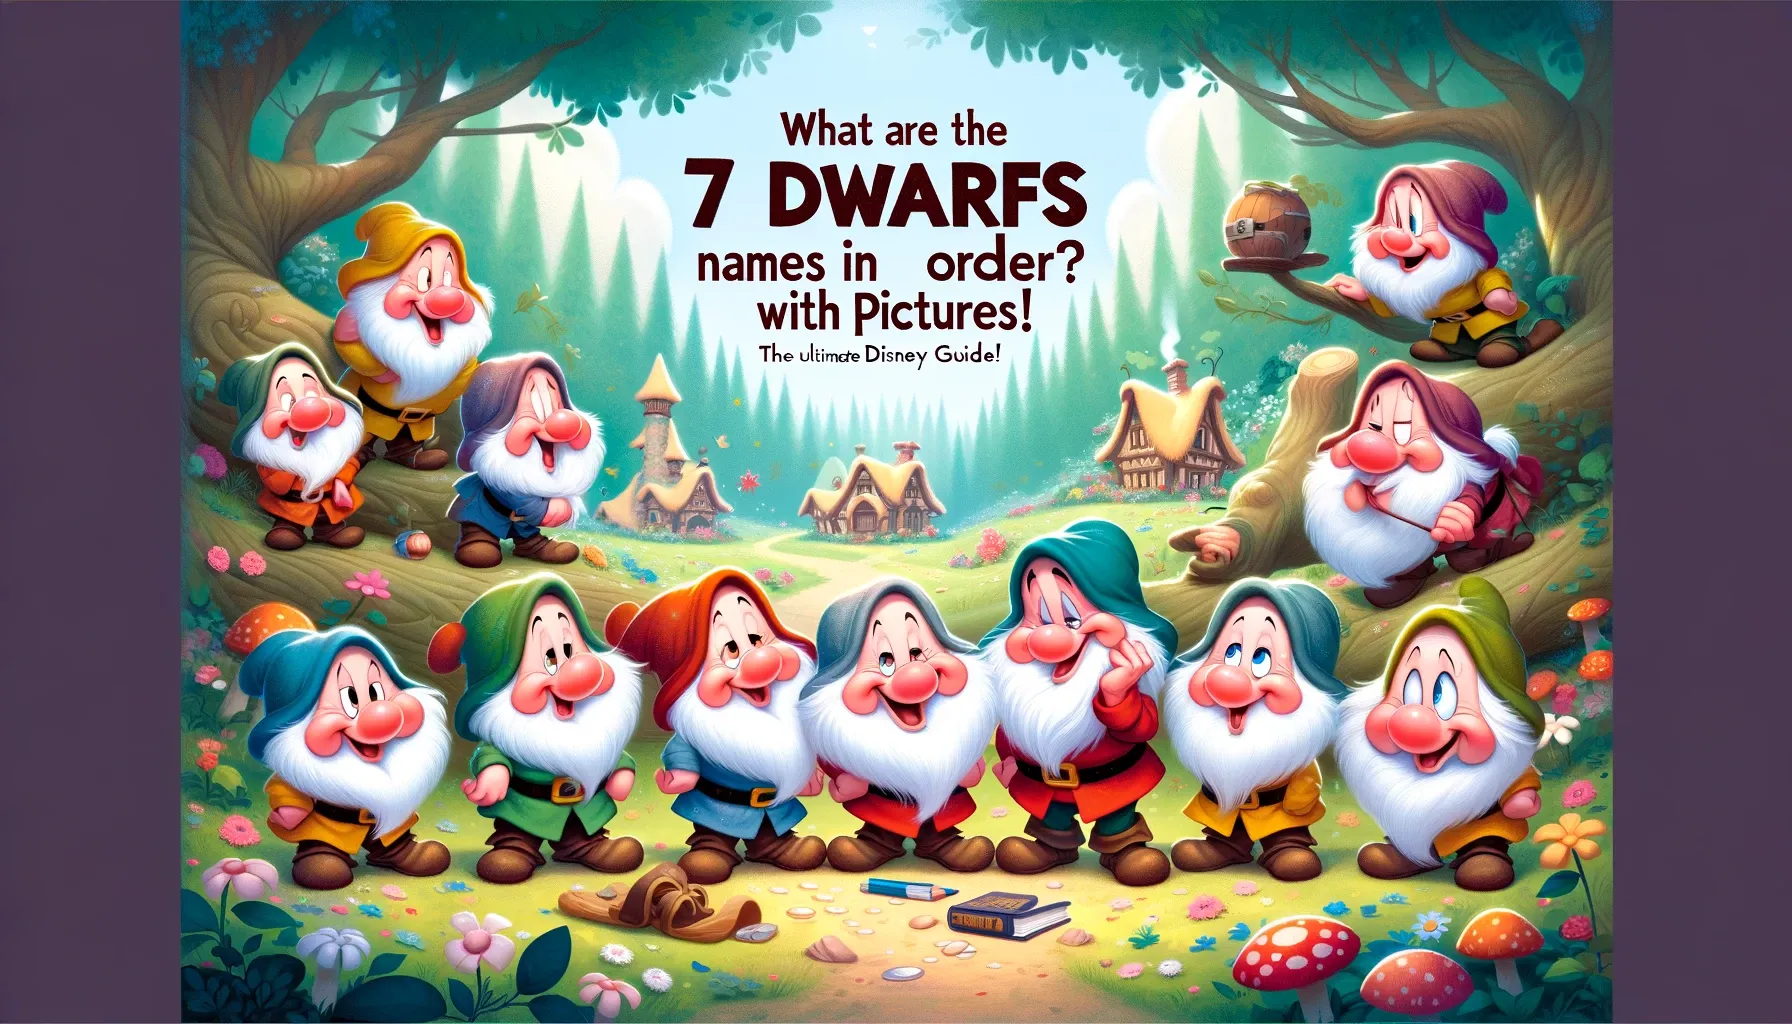 What Are the 7 Dwarfs Names in Order With Pictures? The Ultimate Disney Guide!